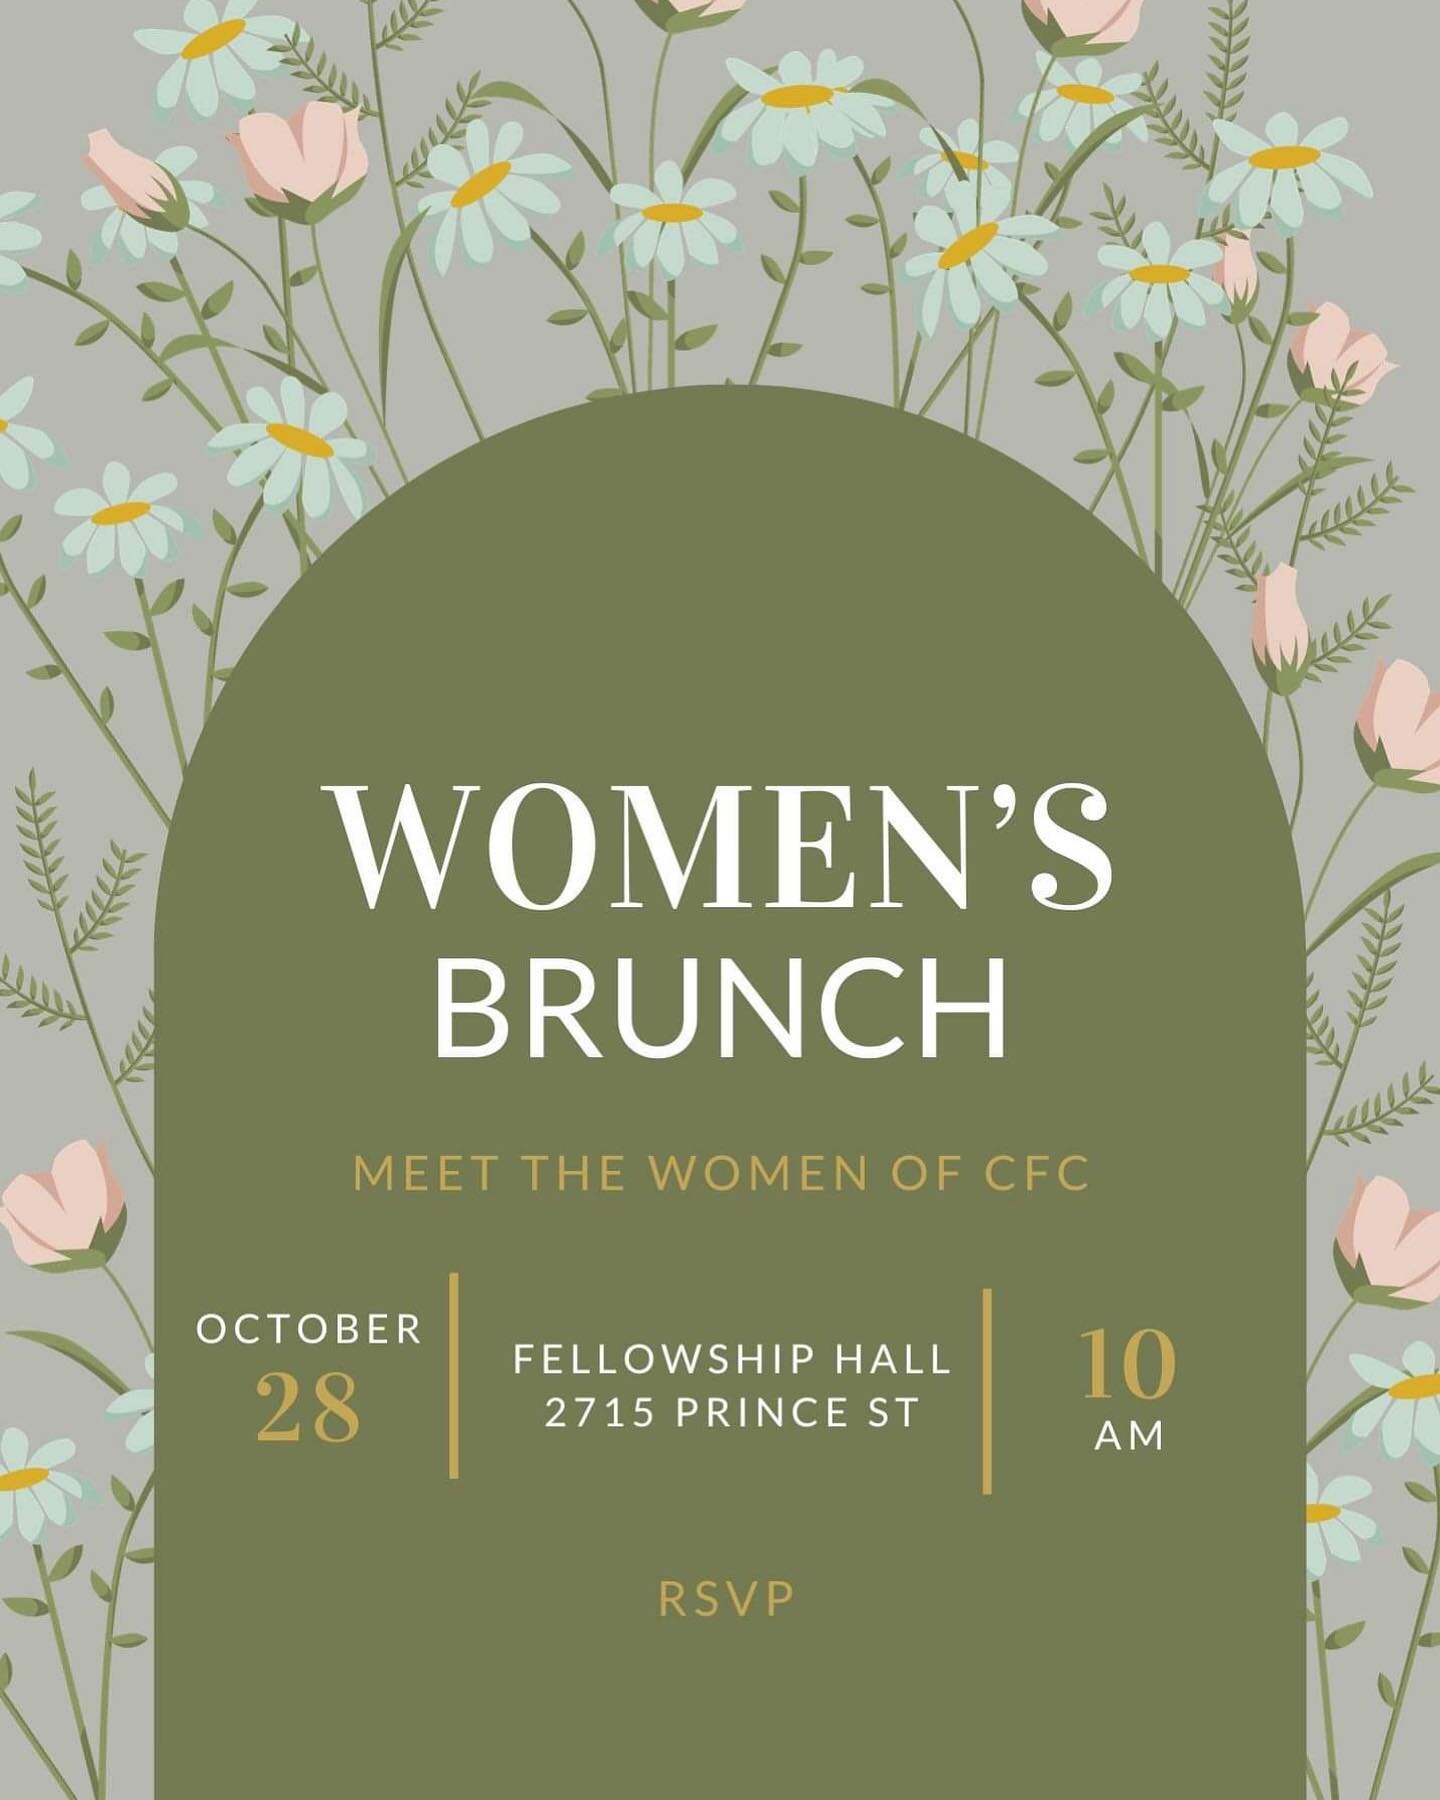 Hello ladies of Vinewood ~ it's officially PSL season!! 

🎃 P repare to enjoy brunch with other
🌶️ S isters from Vinewood
☕️ L ater this month! 

Come join us for our (annual) Women's Brunch &amp; on Saturday 10/28 at 10:30AM! It'll be a time of yu